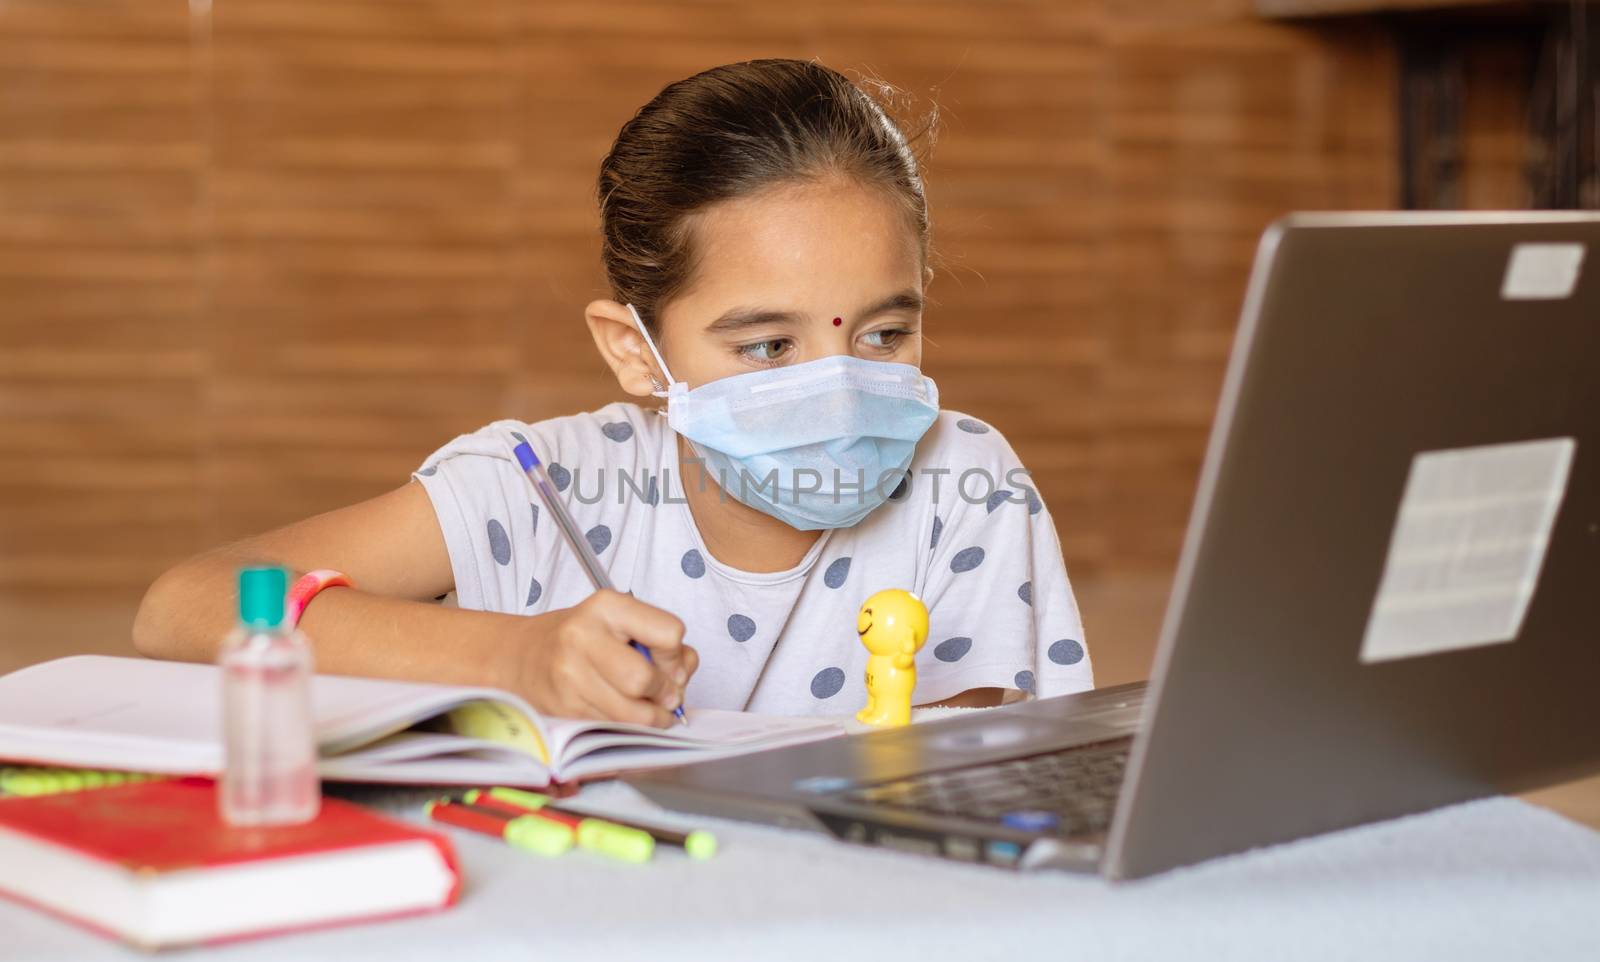 Concept of homeschooling and e-learning, young girl with medical mask writing by looking into laptop during covid-19 or coronavirus pandemic lock down